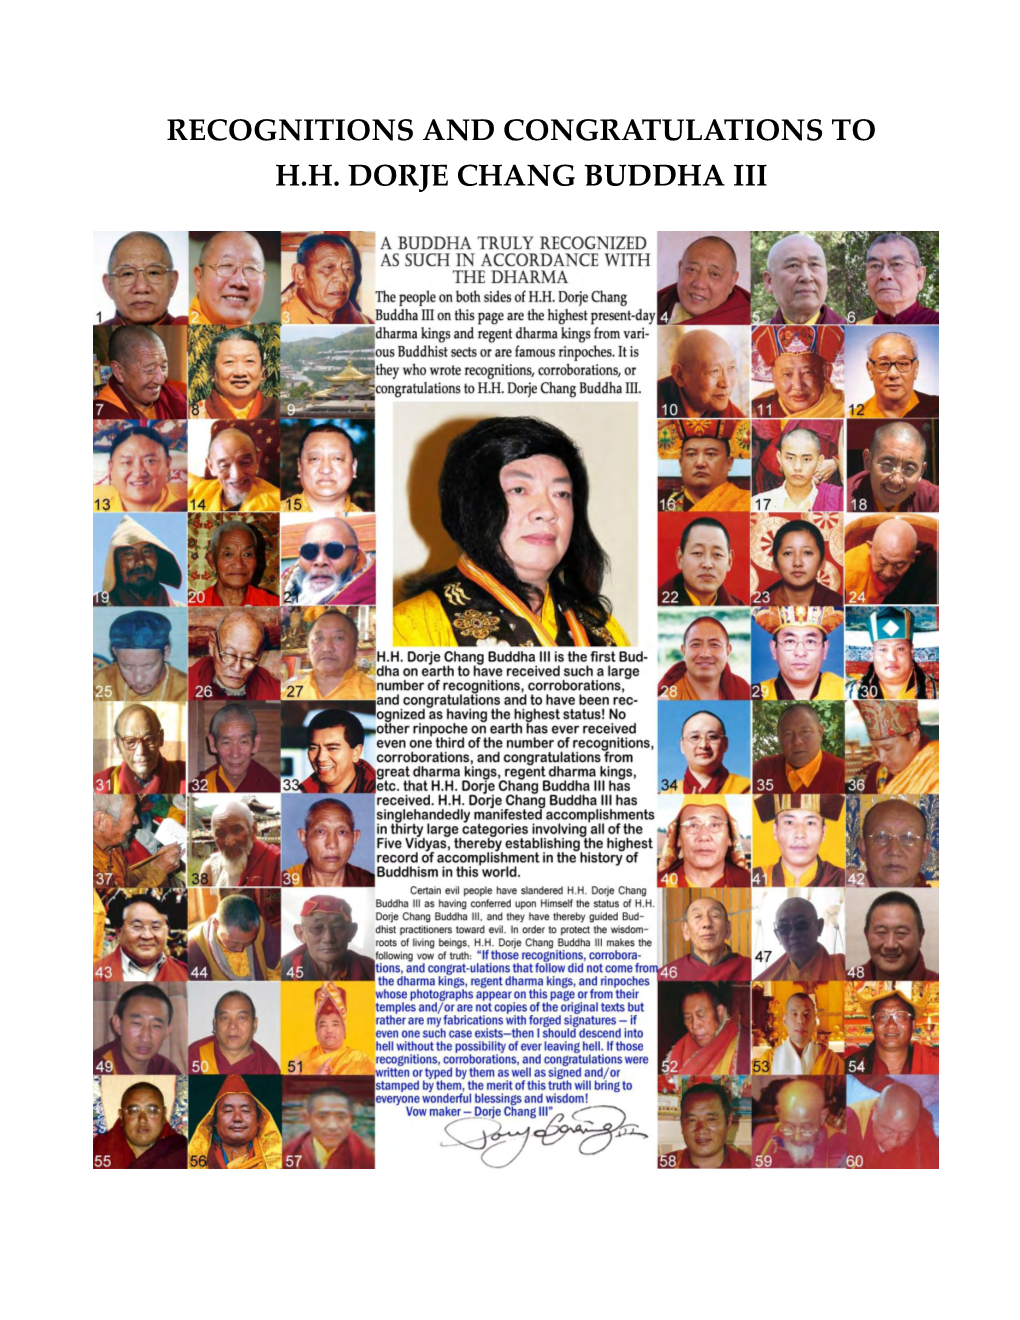 Recognitions and Congratulations to H.H. Dorje Chang Buddha Iii